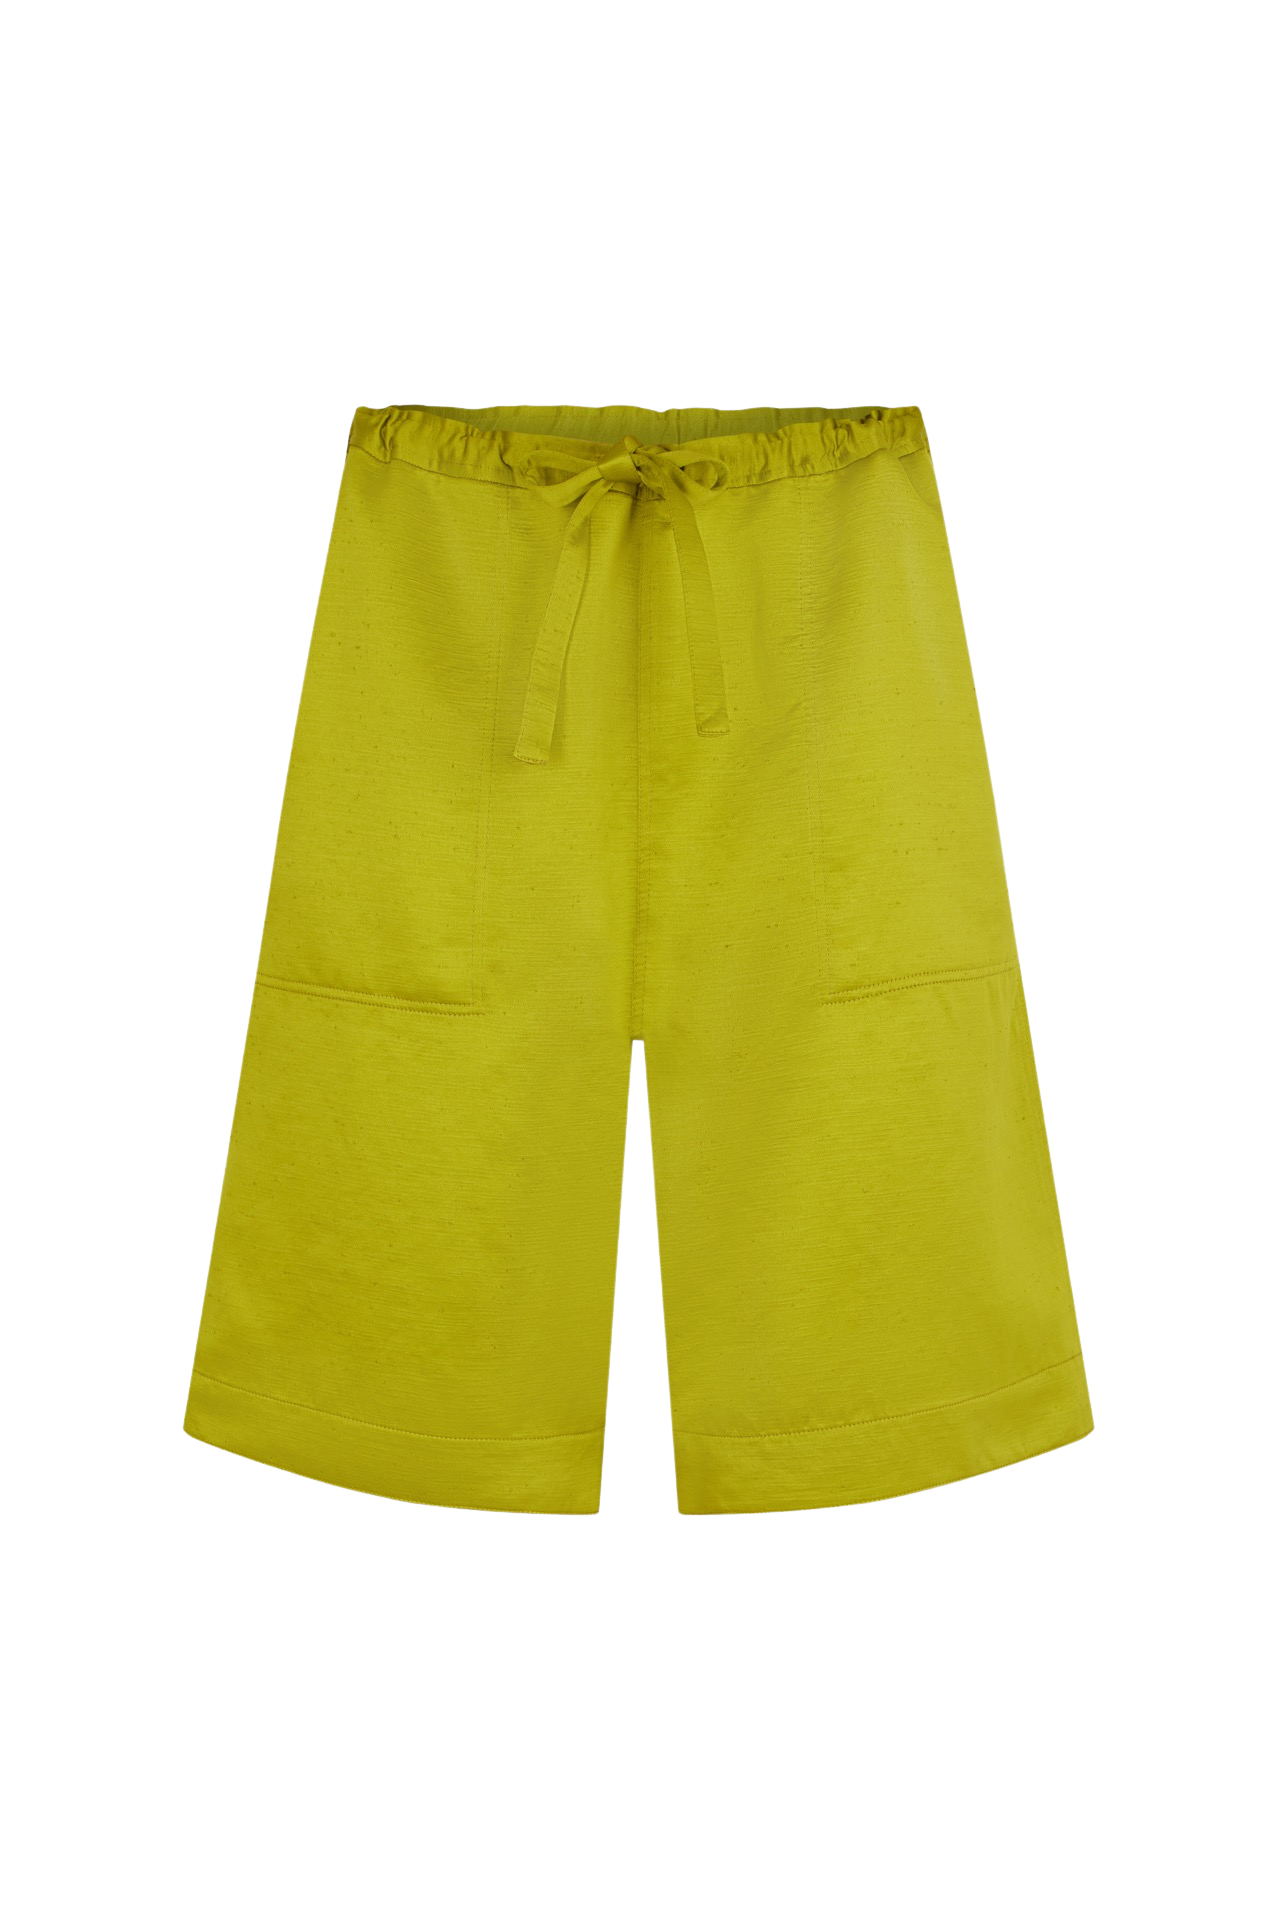 East Side Shorts Green